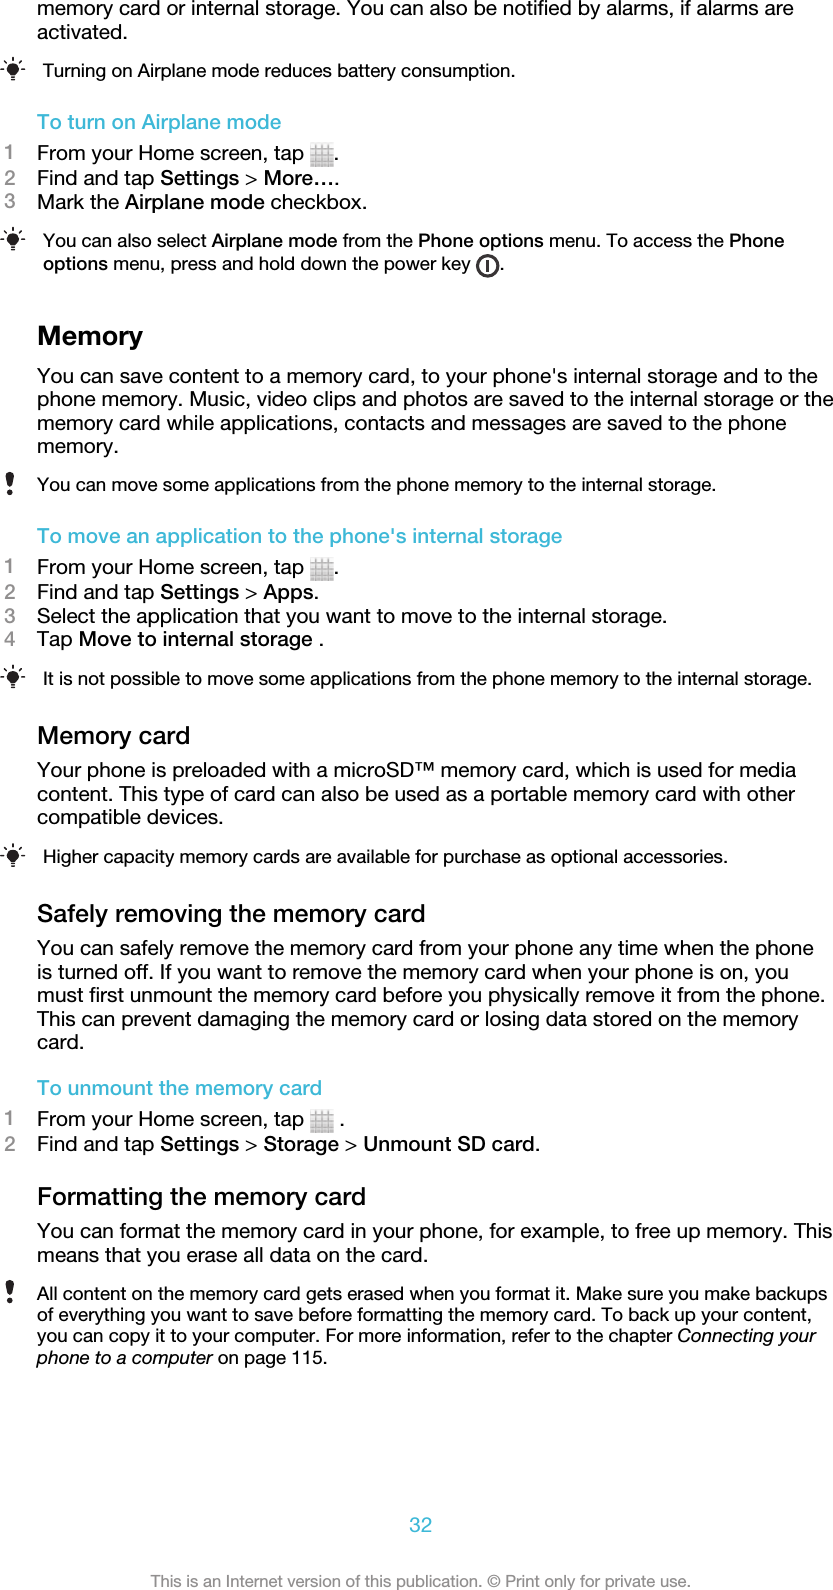 memory card or internal storage. You can also be notified by alarms, if alarms areactivated.Turning on Airplane mode reduces battery consumption.To turn on Airplane mode1From your Home screen, tap  .2Find and tap Settings &gt; More….3Mark the Airplane mode checkbox.You can also select Airplane mode from the Phone options menu. To access the Phoneoptions menu, press and hold down the power key  .MemoryYou can save content to a memory card, to your phone&apos;s internal storage and to thephone memory. Music, video clips and photos are saved to the internal storage or thememory card while applications, contacts and messages are saved to the phonememory.You can move some applications from the phone memory to the internal storage.To move an application to the phone&apos;s internal storage1From your Home screen, tap  .2Find and tap Settings &gt; Apps.3Select the application that you want to move to the internal storage.4Tap Move to internal storage .It is not possible to move some applications from the phone memory to the internal storage.Memory cardYour phone is preloaded with a microSD™ memory card, which is used for mediacontent. This type of card can also be used as a portable memory card with othercompatible devices.Higher capacity memory cards are available for purchase as optional accessories.Safely removing the memory cardYou can safely remove the memory card from your phone any time when the phoneis turned off. If you want to remove the memory card when your phone is on, youmust first unmount the memory card before you physically remove it from the phone.This can prevent damaging the memory card or losing data stored on the memorycard.To unmount the memory card1From your Home screen, tap   .2Find and tap Settings &gt; Storage &gt; Unmount SD card.Formatting the memory cardYou can format the memory card in your phone, for example, to free up memory. Thismeans that you erase all data on the card.All content on the memory card gets erased when you format it. Make sure you make backupsof everything you want to save before formatting the memory card. To back up your content,you can copy it to your computer. For more information, refer to the chapter Connecting yourphone to a computer on page 115.32This is an Internet version of this publication. © Print only for private use.